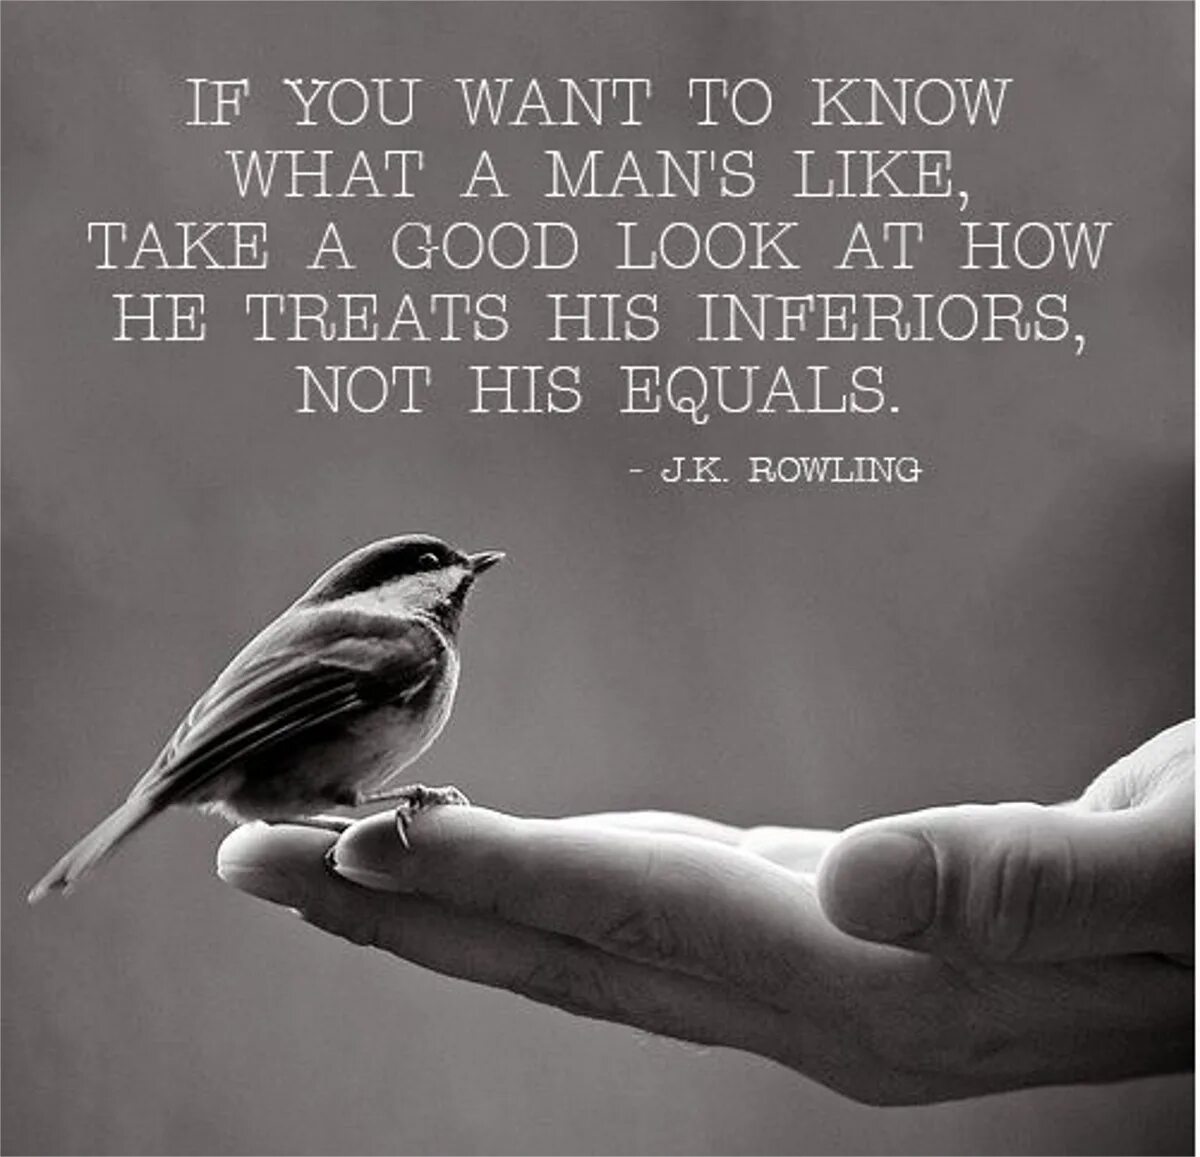 Take good. If you want to know what a man’s like, take a good look at how he treats his inferiors, not his equals.. His inferiors not his equals. If you want to know. Know what you want quotes.